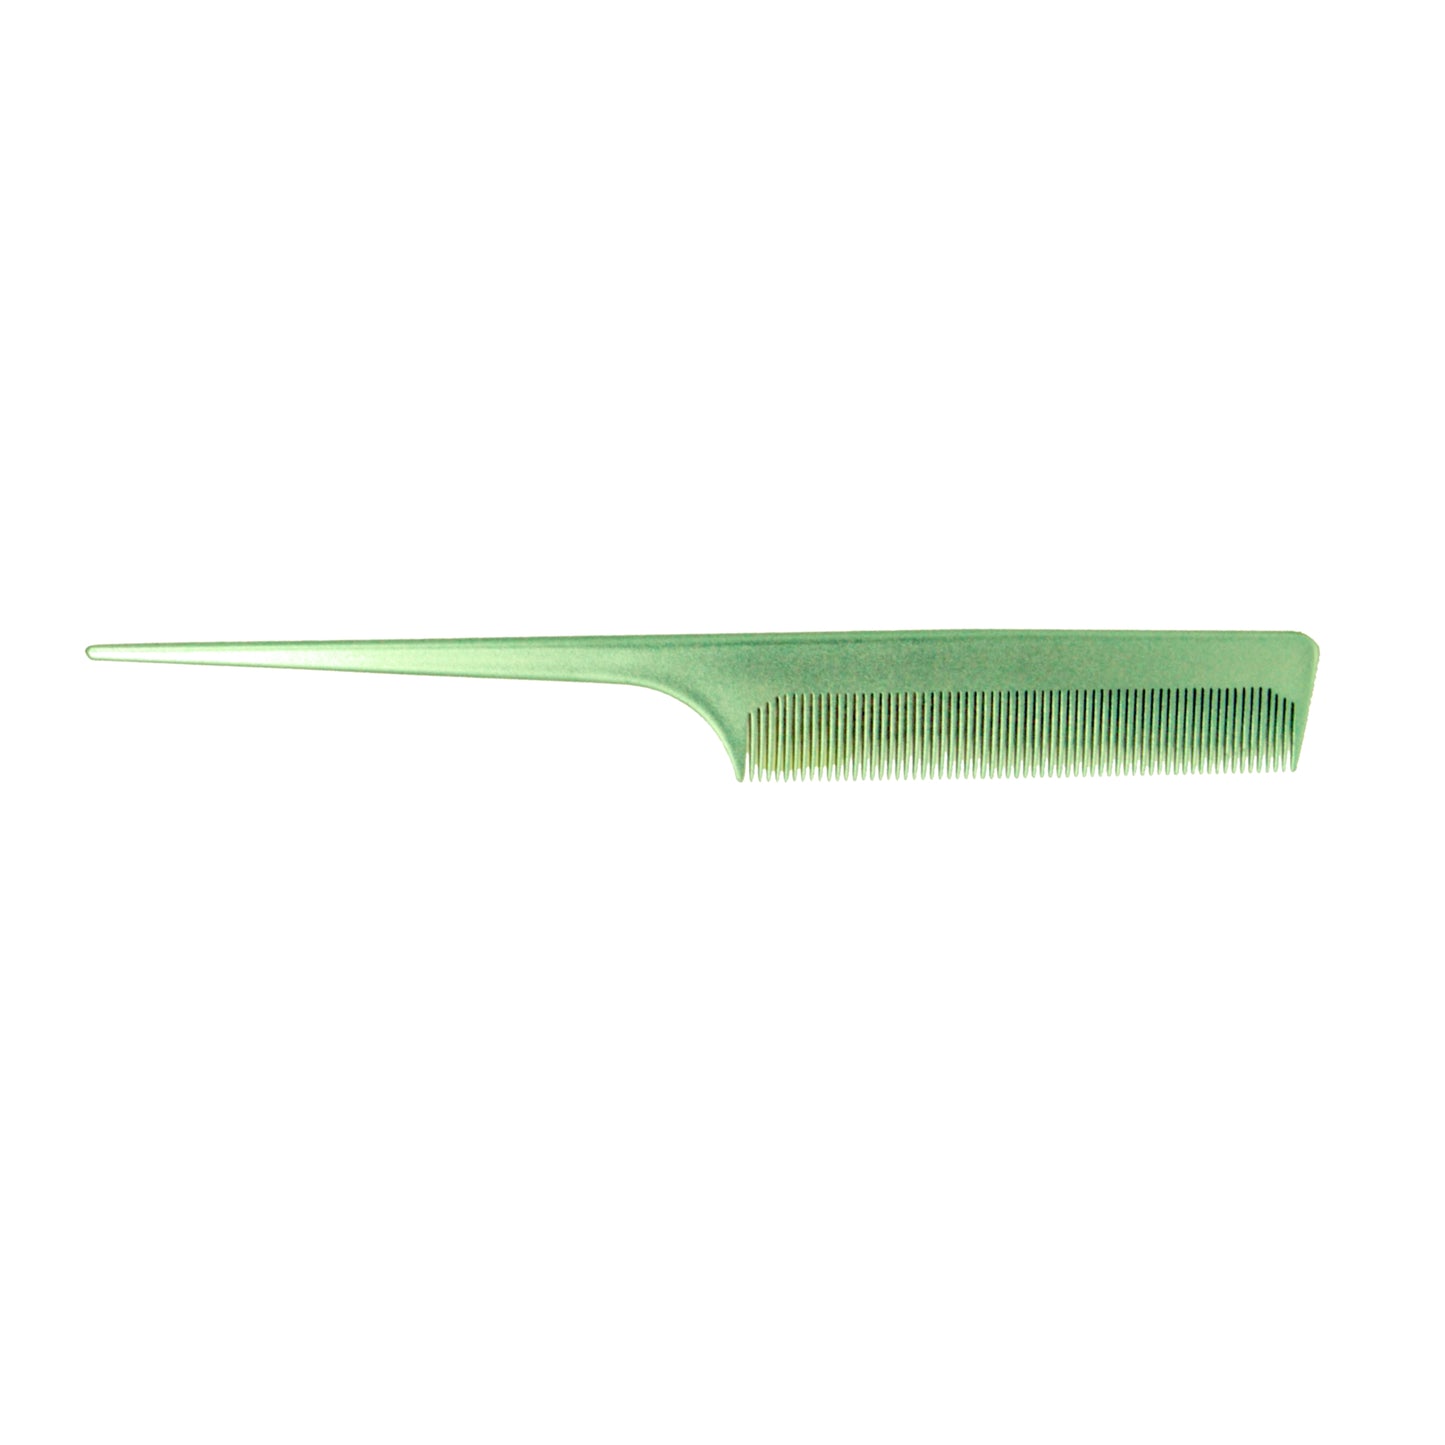 Pegasus MICOLOR 101, 8in Hard Rubber Fine Tooth Rat Tail Comb, Handmade, Seamless, Smooth Edges, Anti Static, Heat and Chemically Resistant, Great for Parting, Coloring Hair | Peines de goma dura - Green